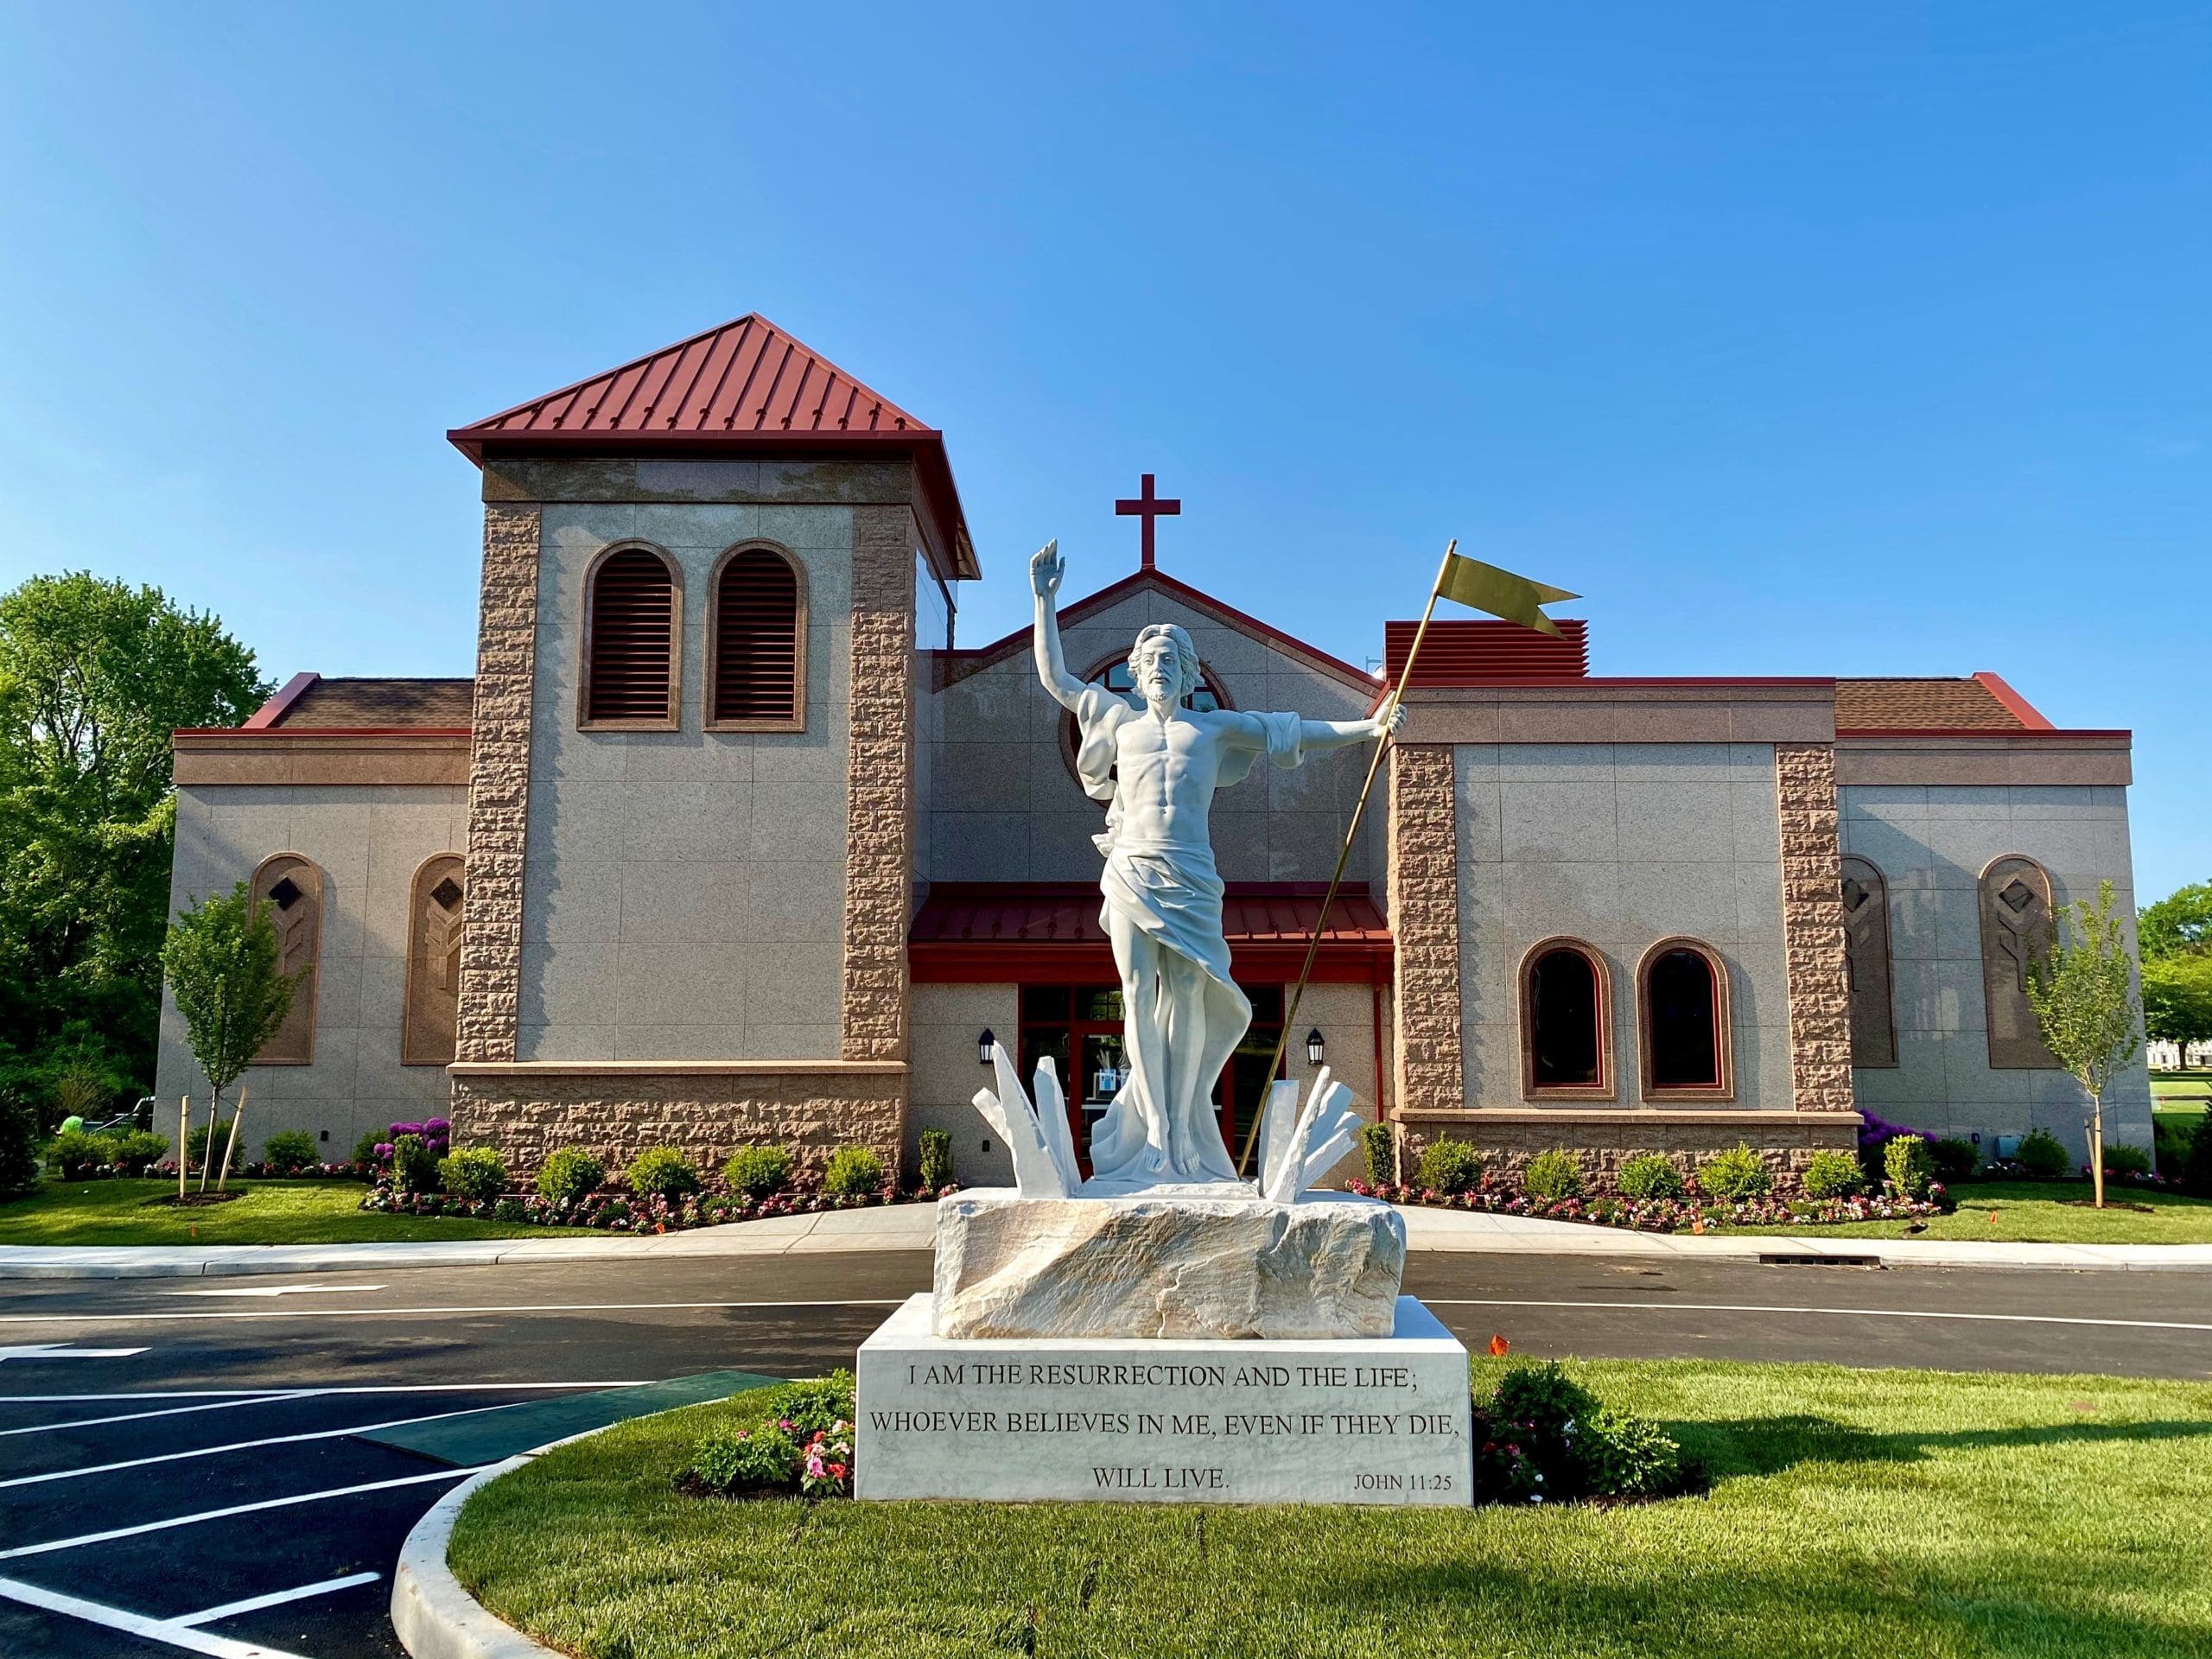 A statue of Jesus at the Chapel Mausoleum of the Resurrection, at Saint Gertrude Cemetery and Chapel Mausoleum of the Resurrection in Colonia, N.J. (Courtesy of Catholic Cemeteries of the Archdiocese of Newark)